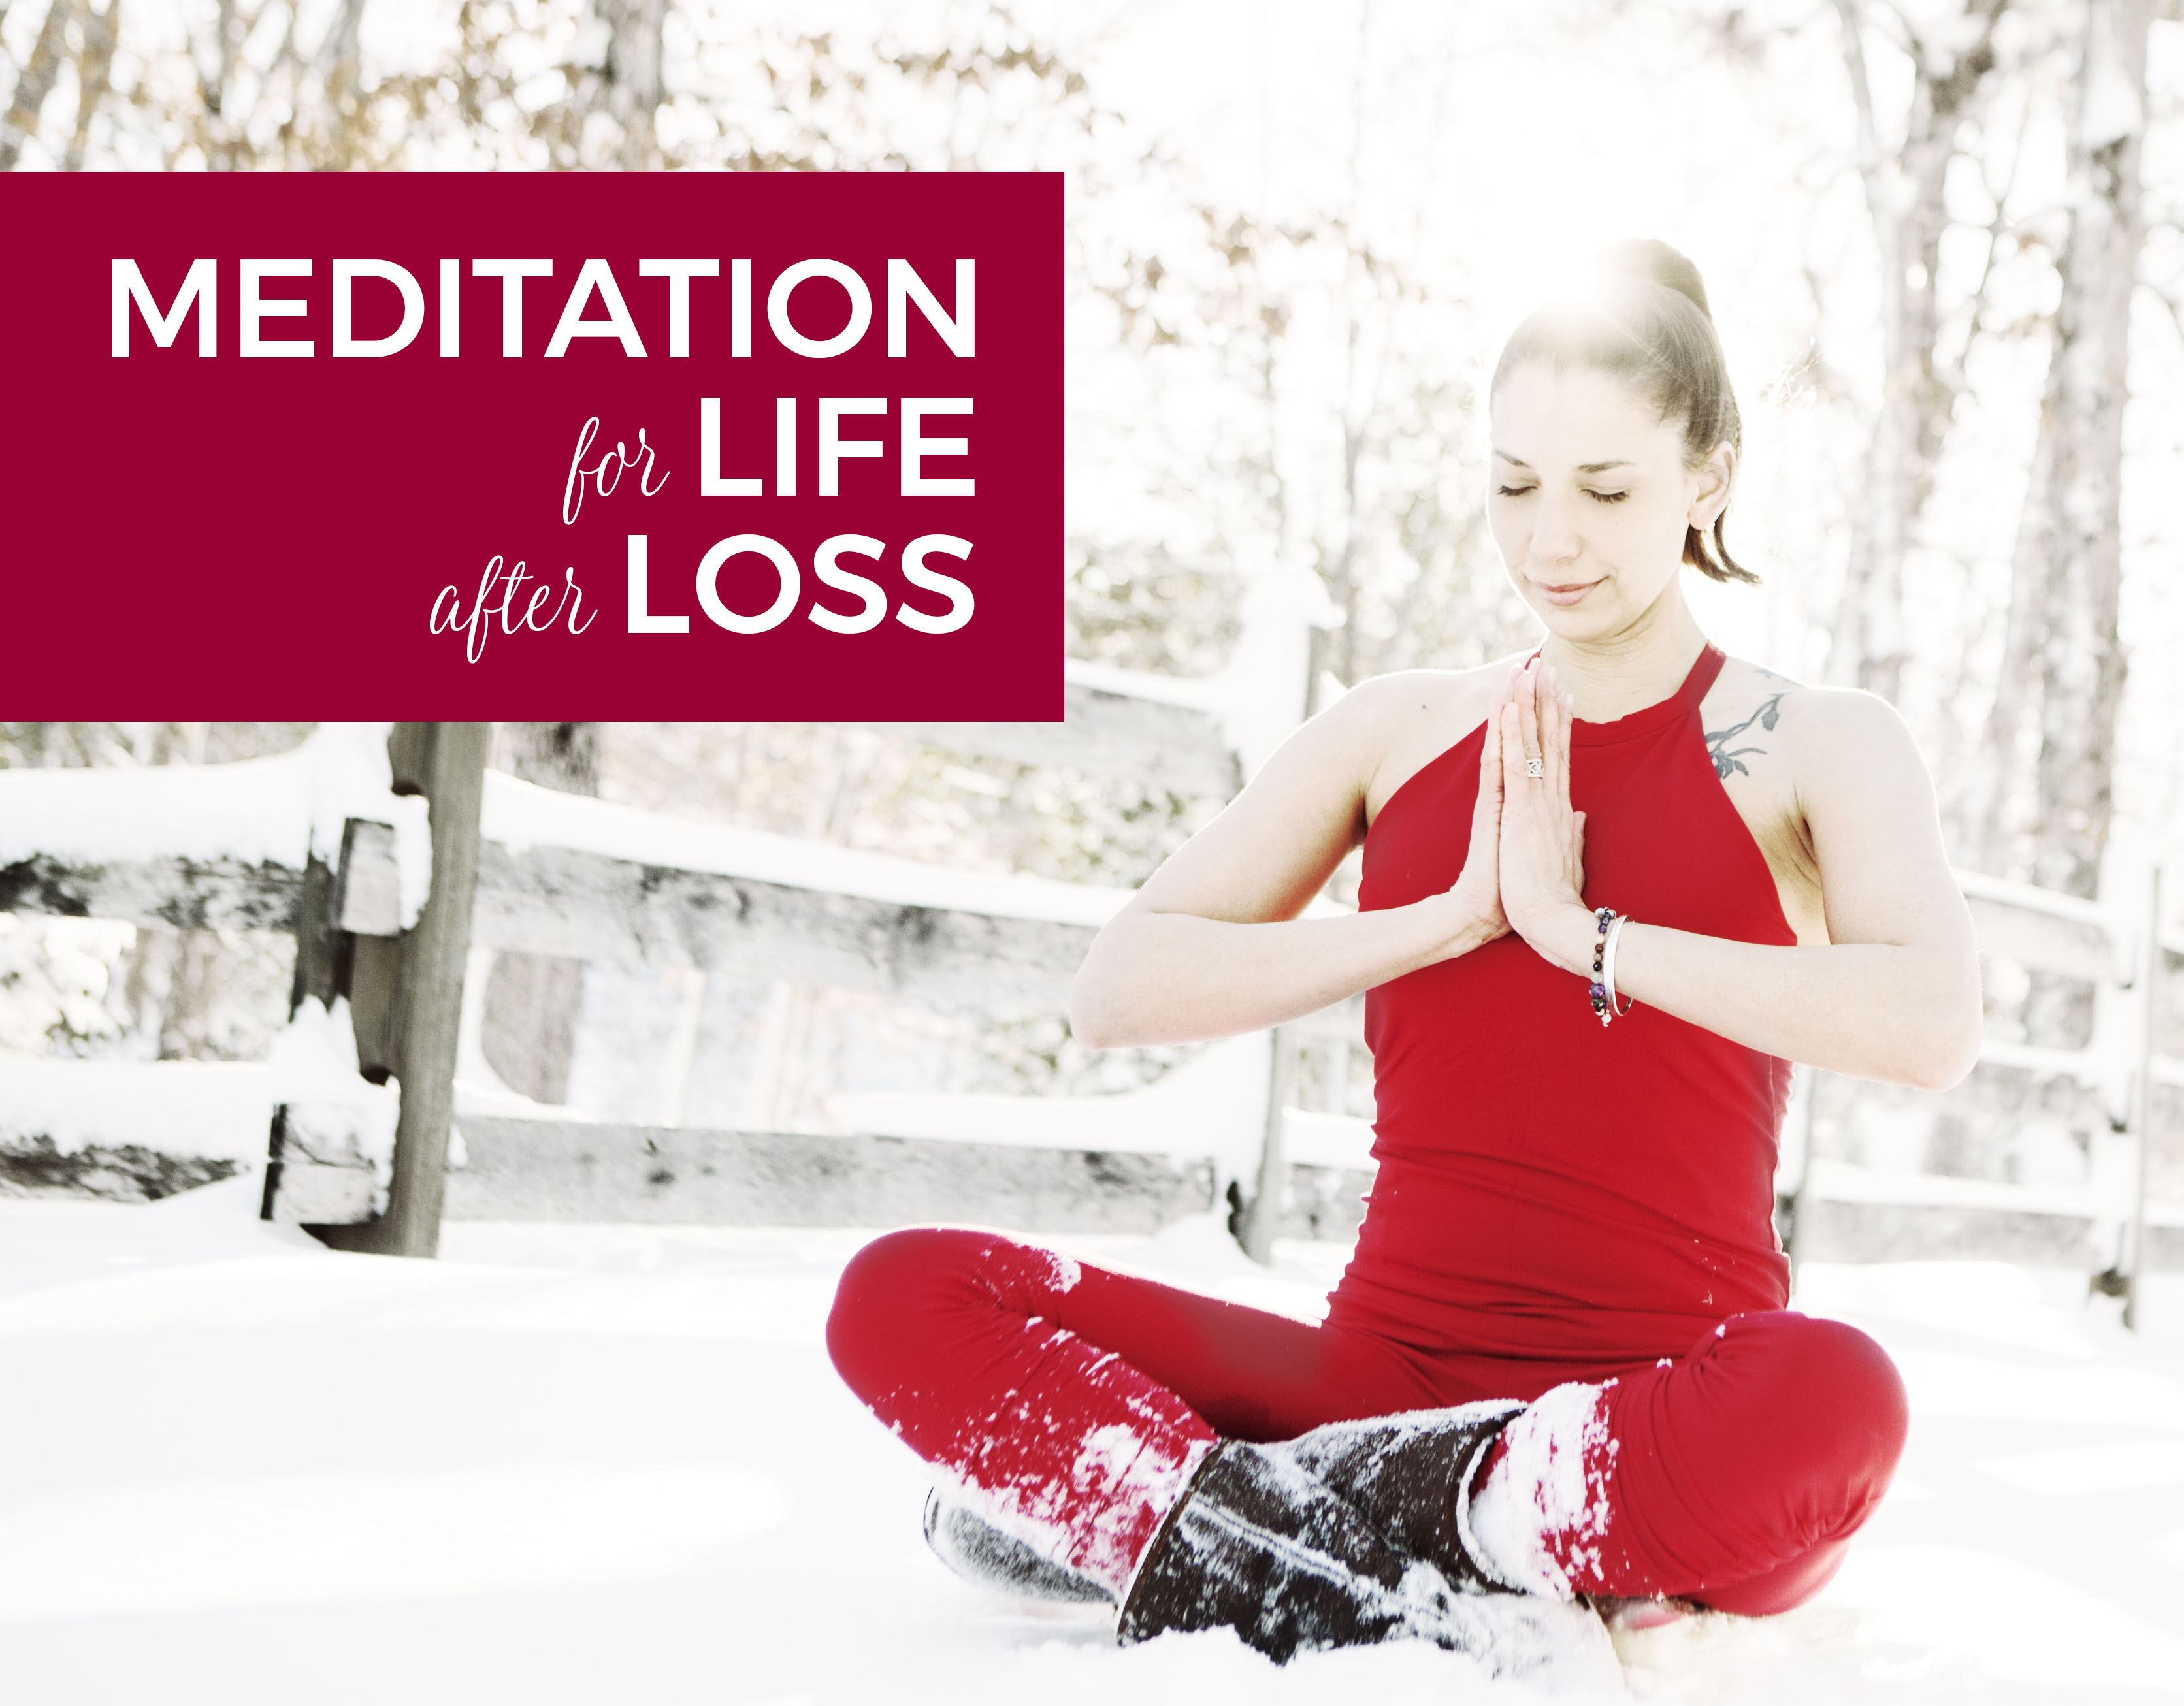 Meditation for Life after Loss: Meditation Tutorial for Beginners (Video + Audio)